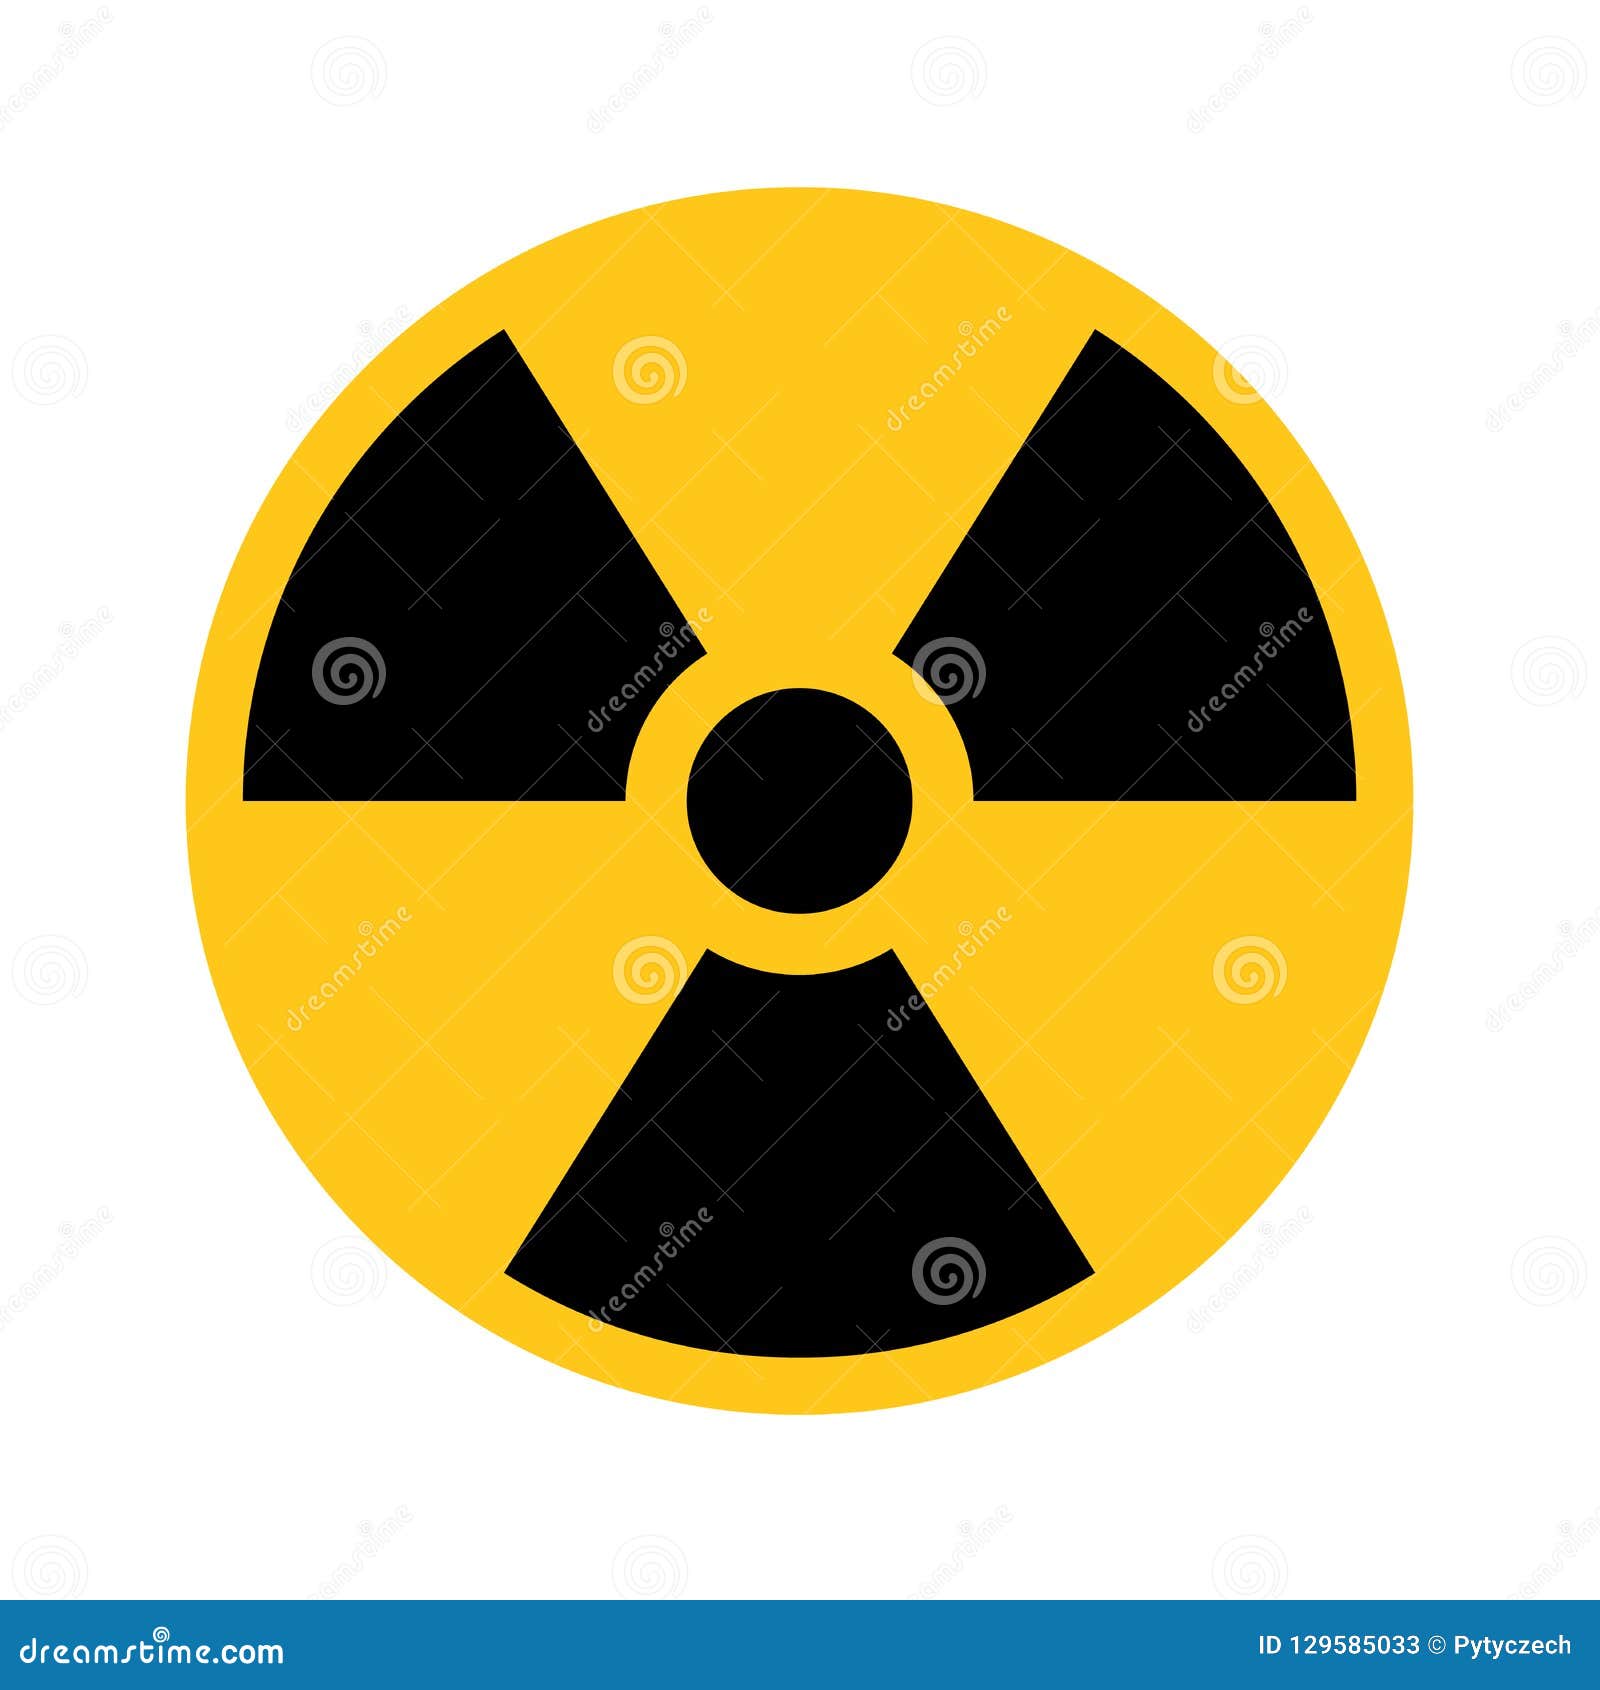 radioactive material sign.  of radiation alert, hazard or risk. simple flat   in black and